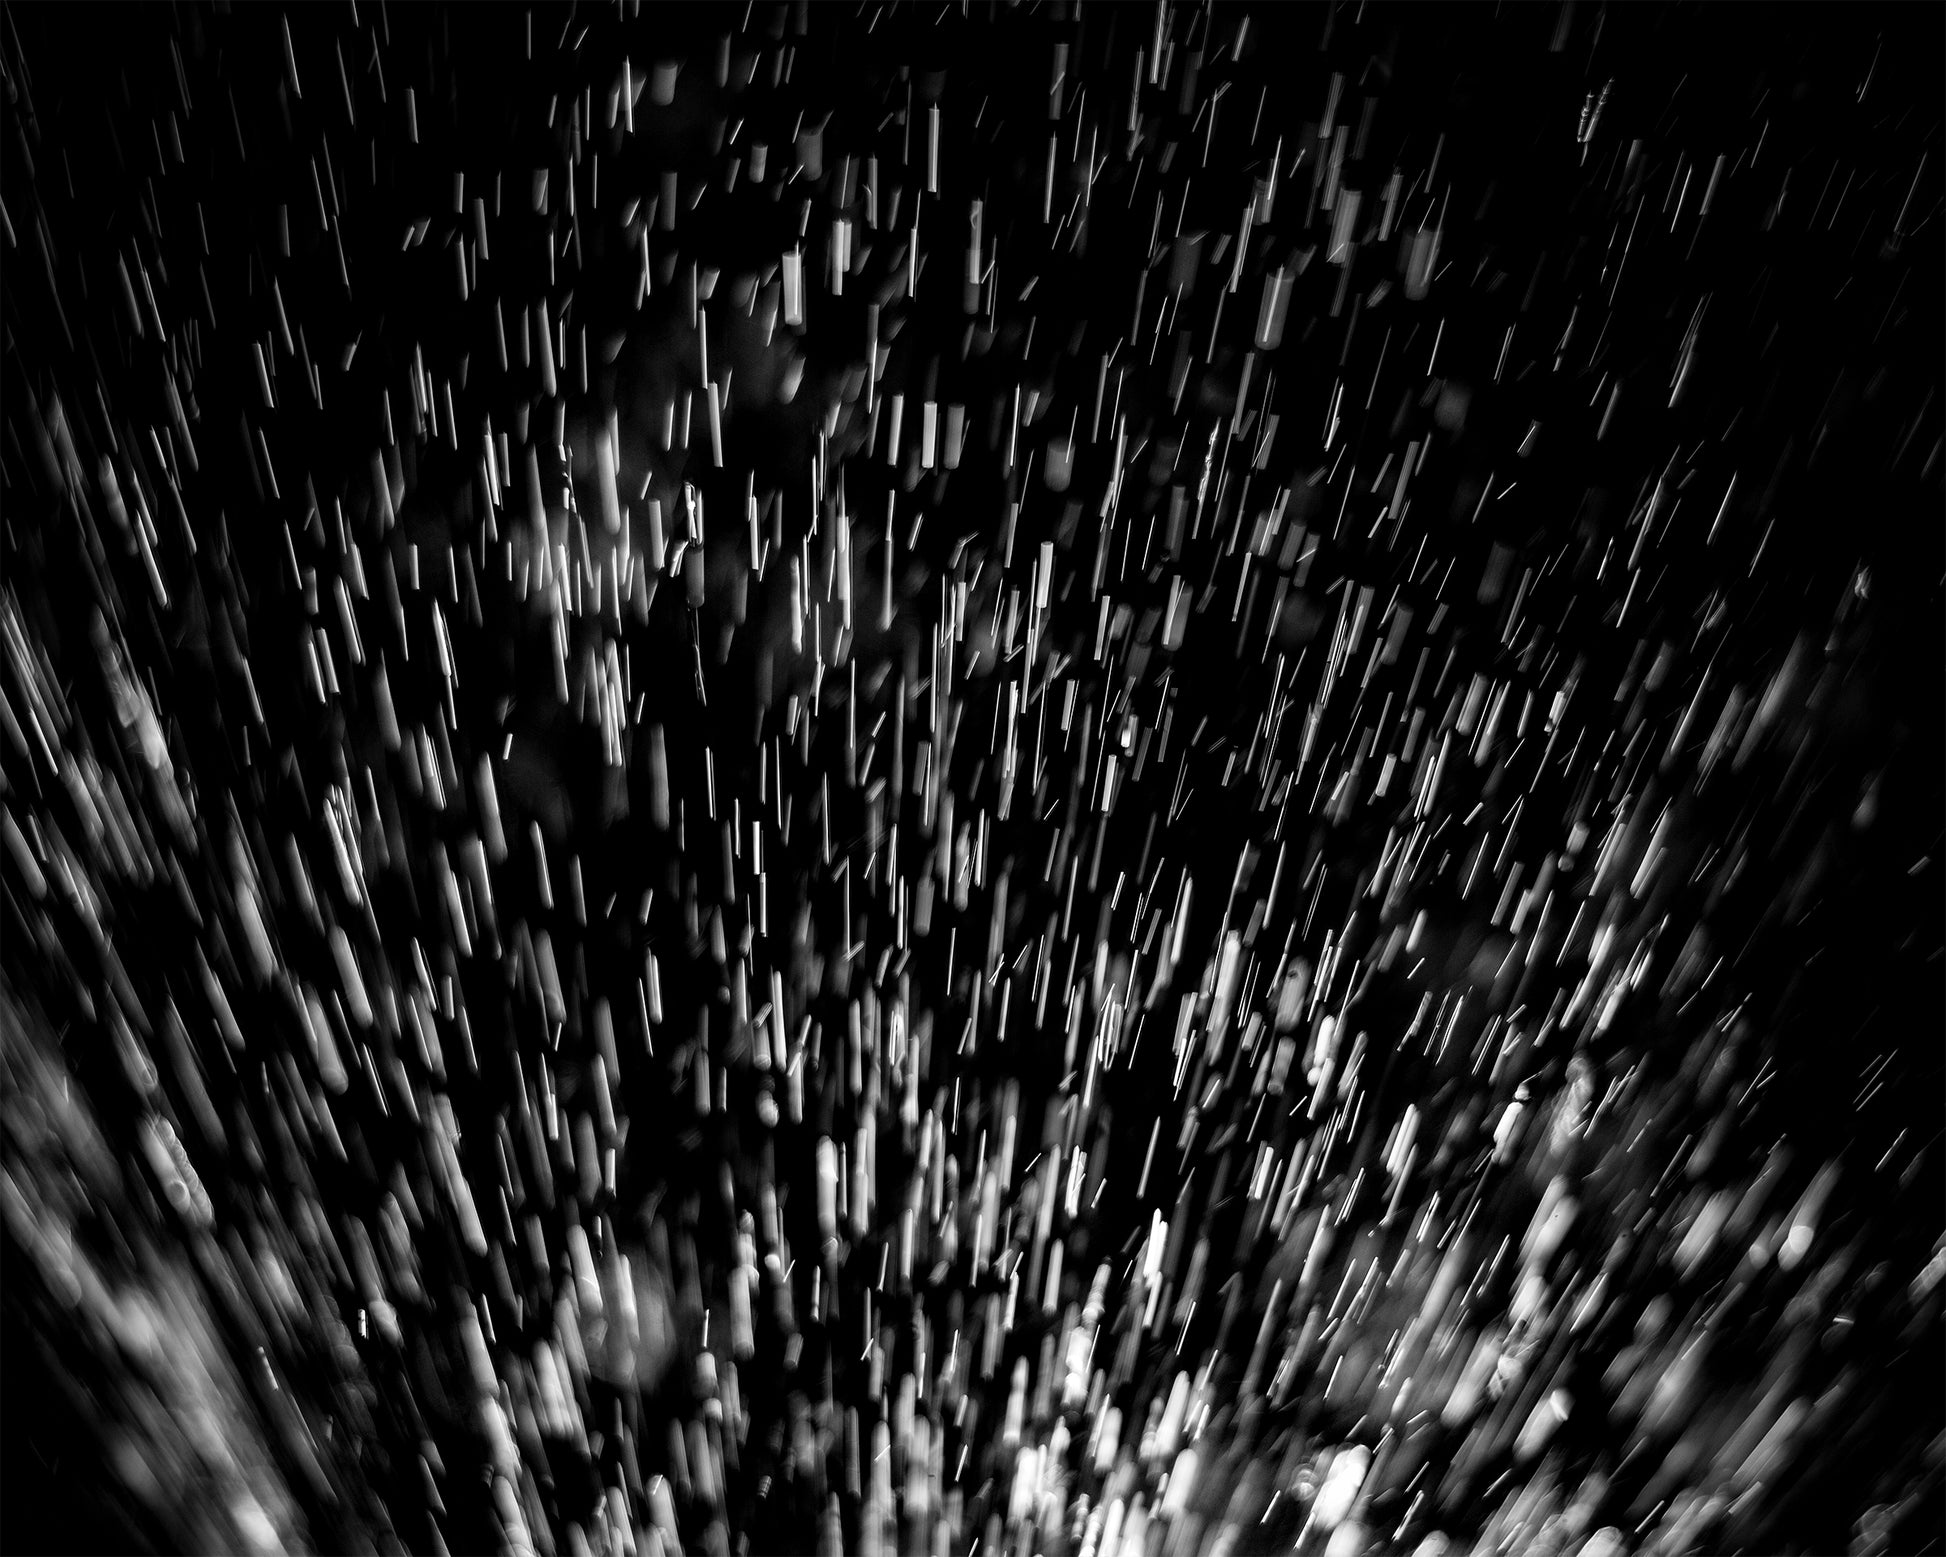 abstract water spray, backlit, spraying up, macro, black and white, photo art print in black frame on white background